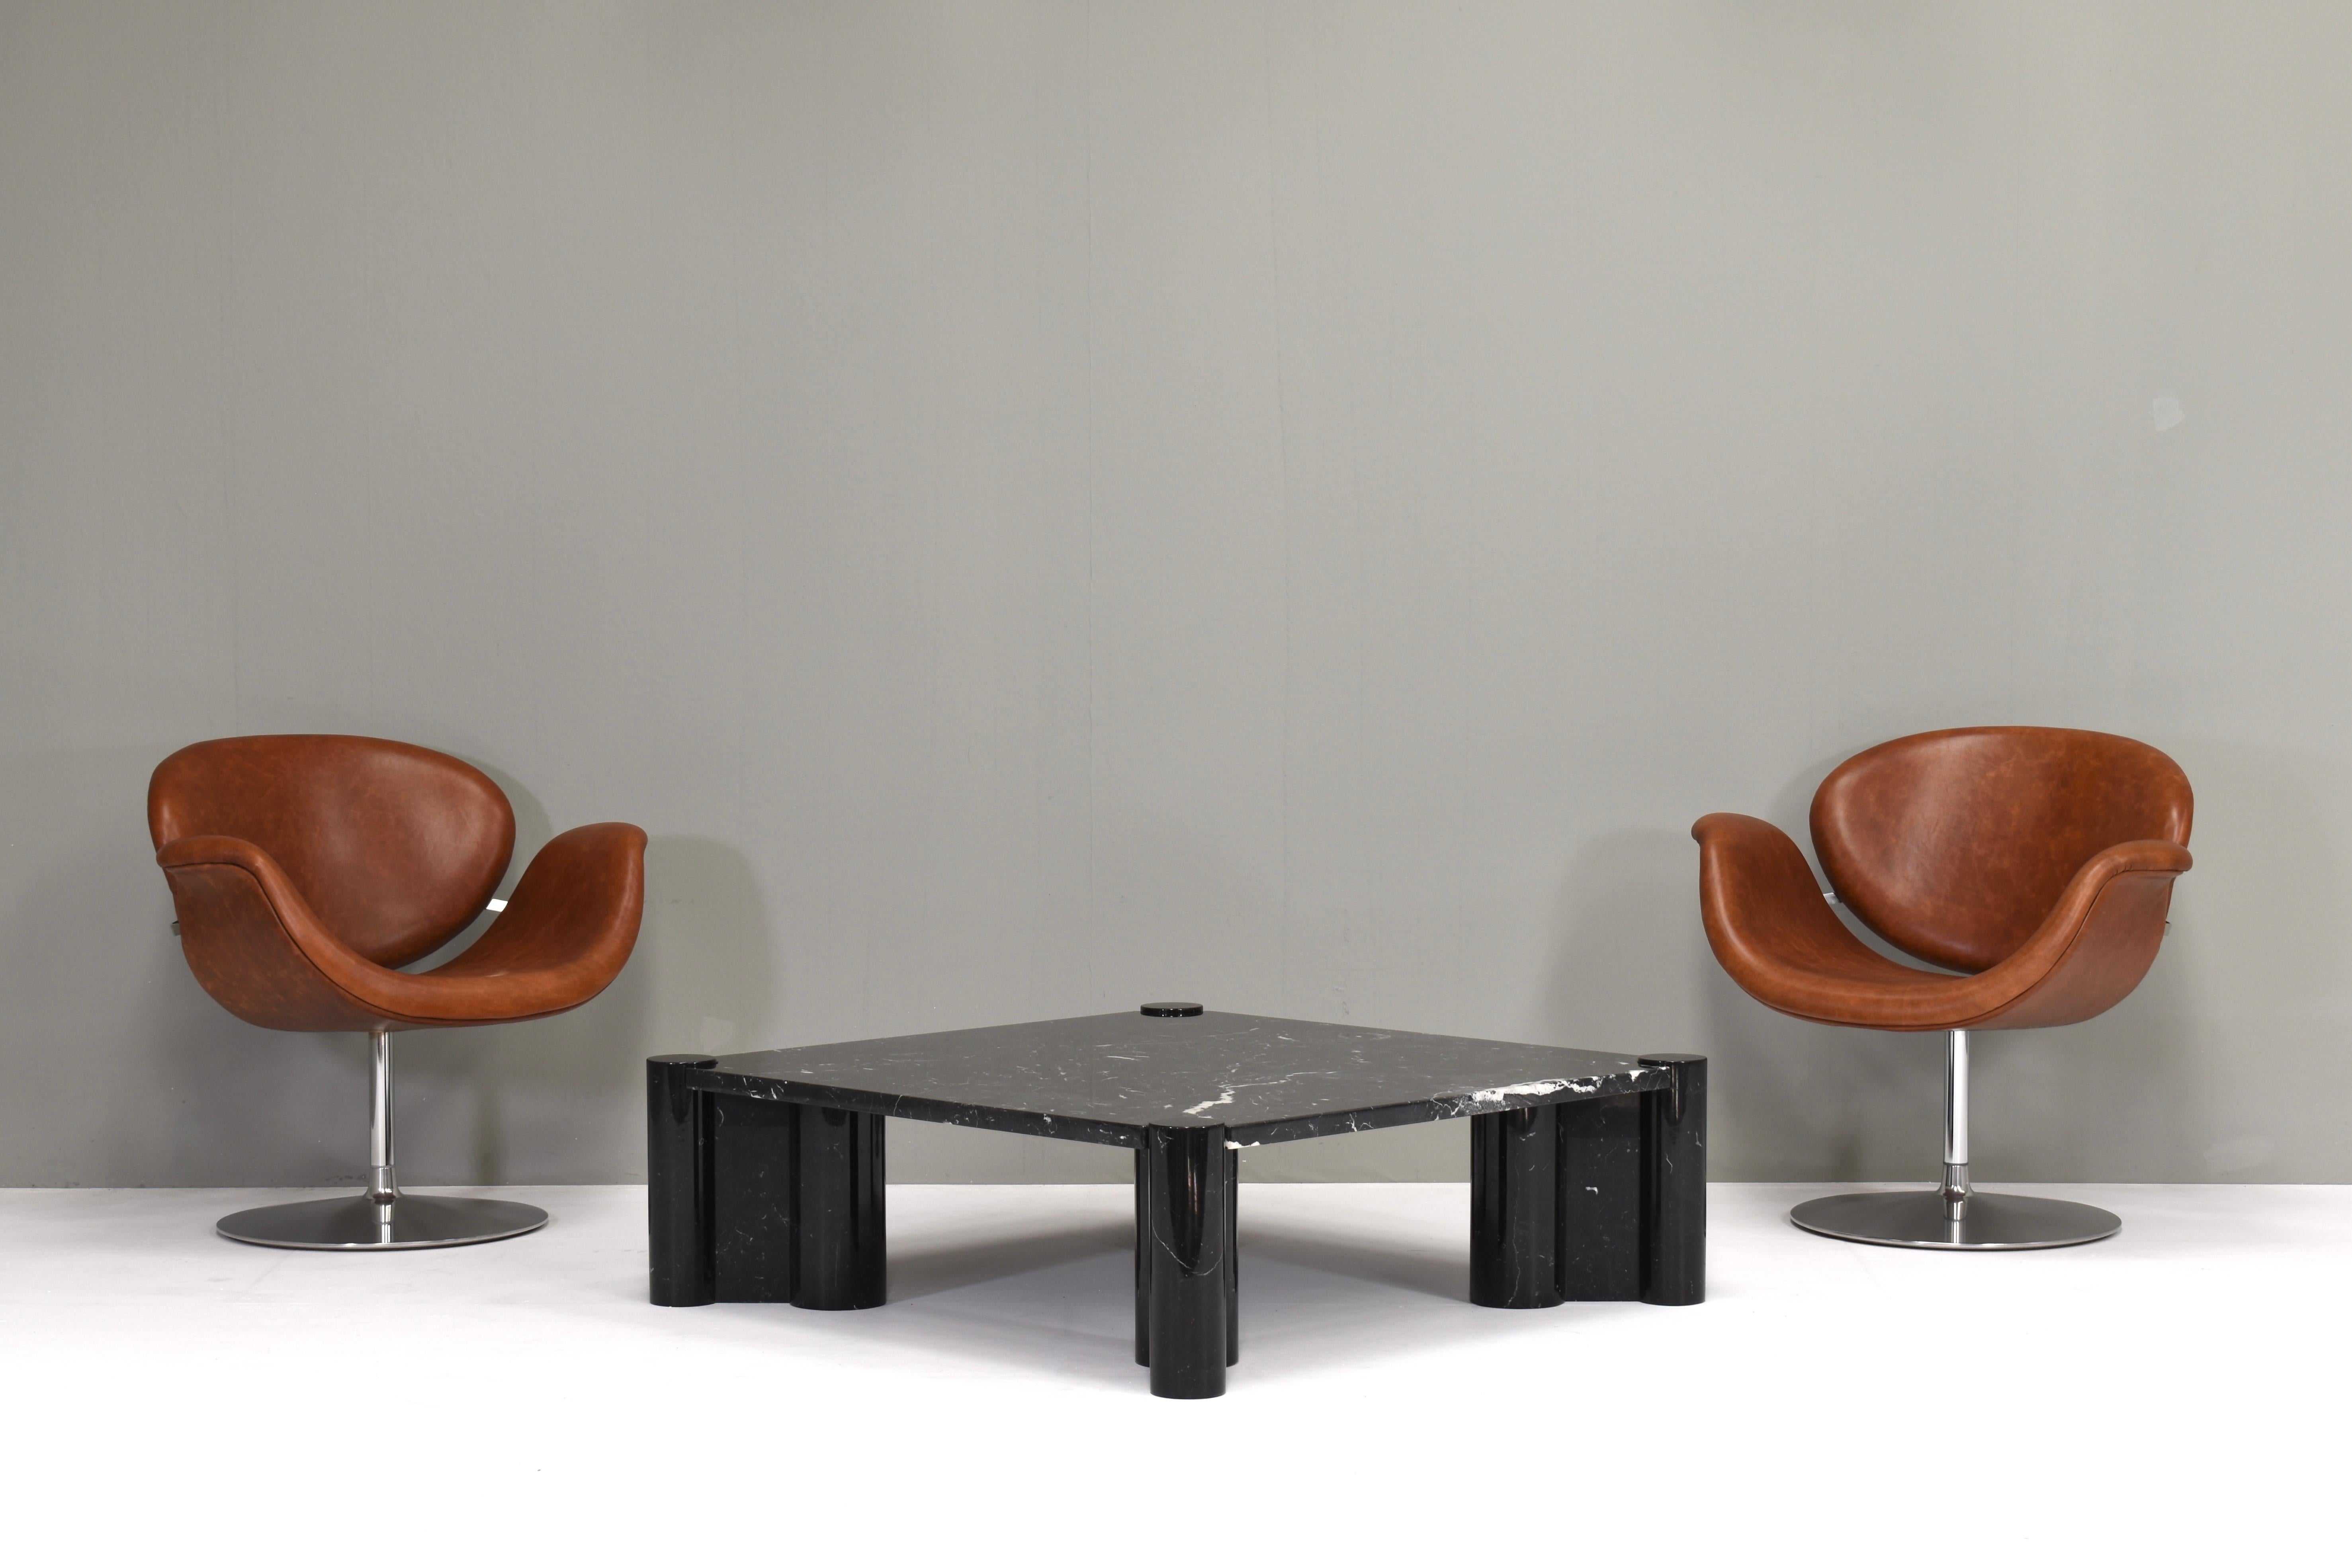 Gae Aulenti for Knoll ‘Jumbo’ Coffee Table in Nero Marquina Black Marble, Italy  7